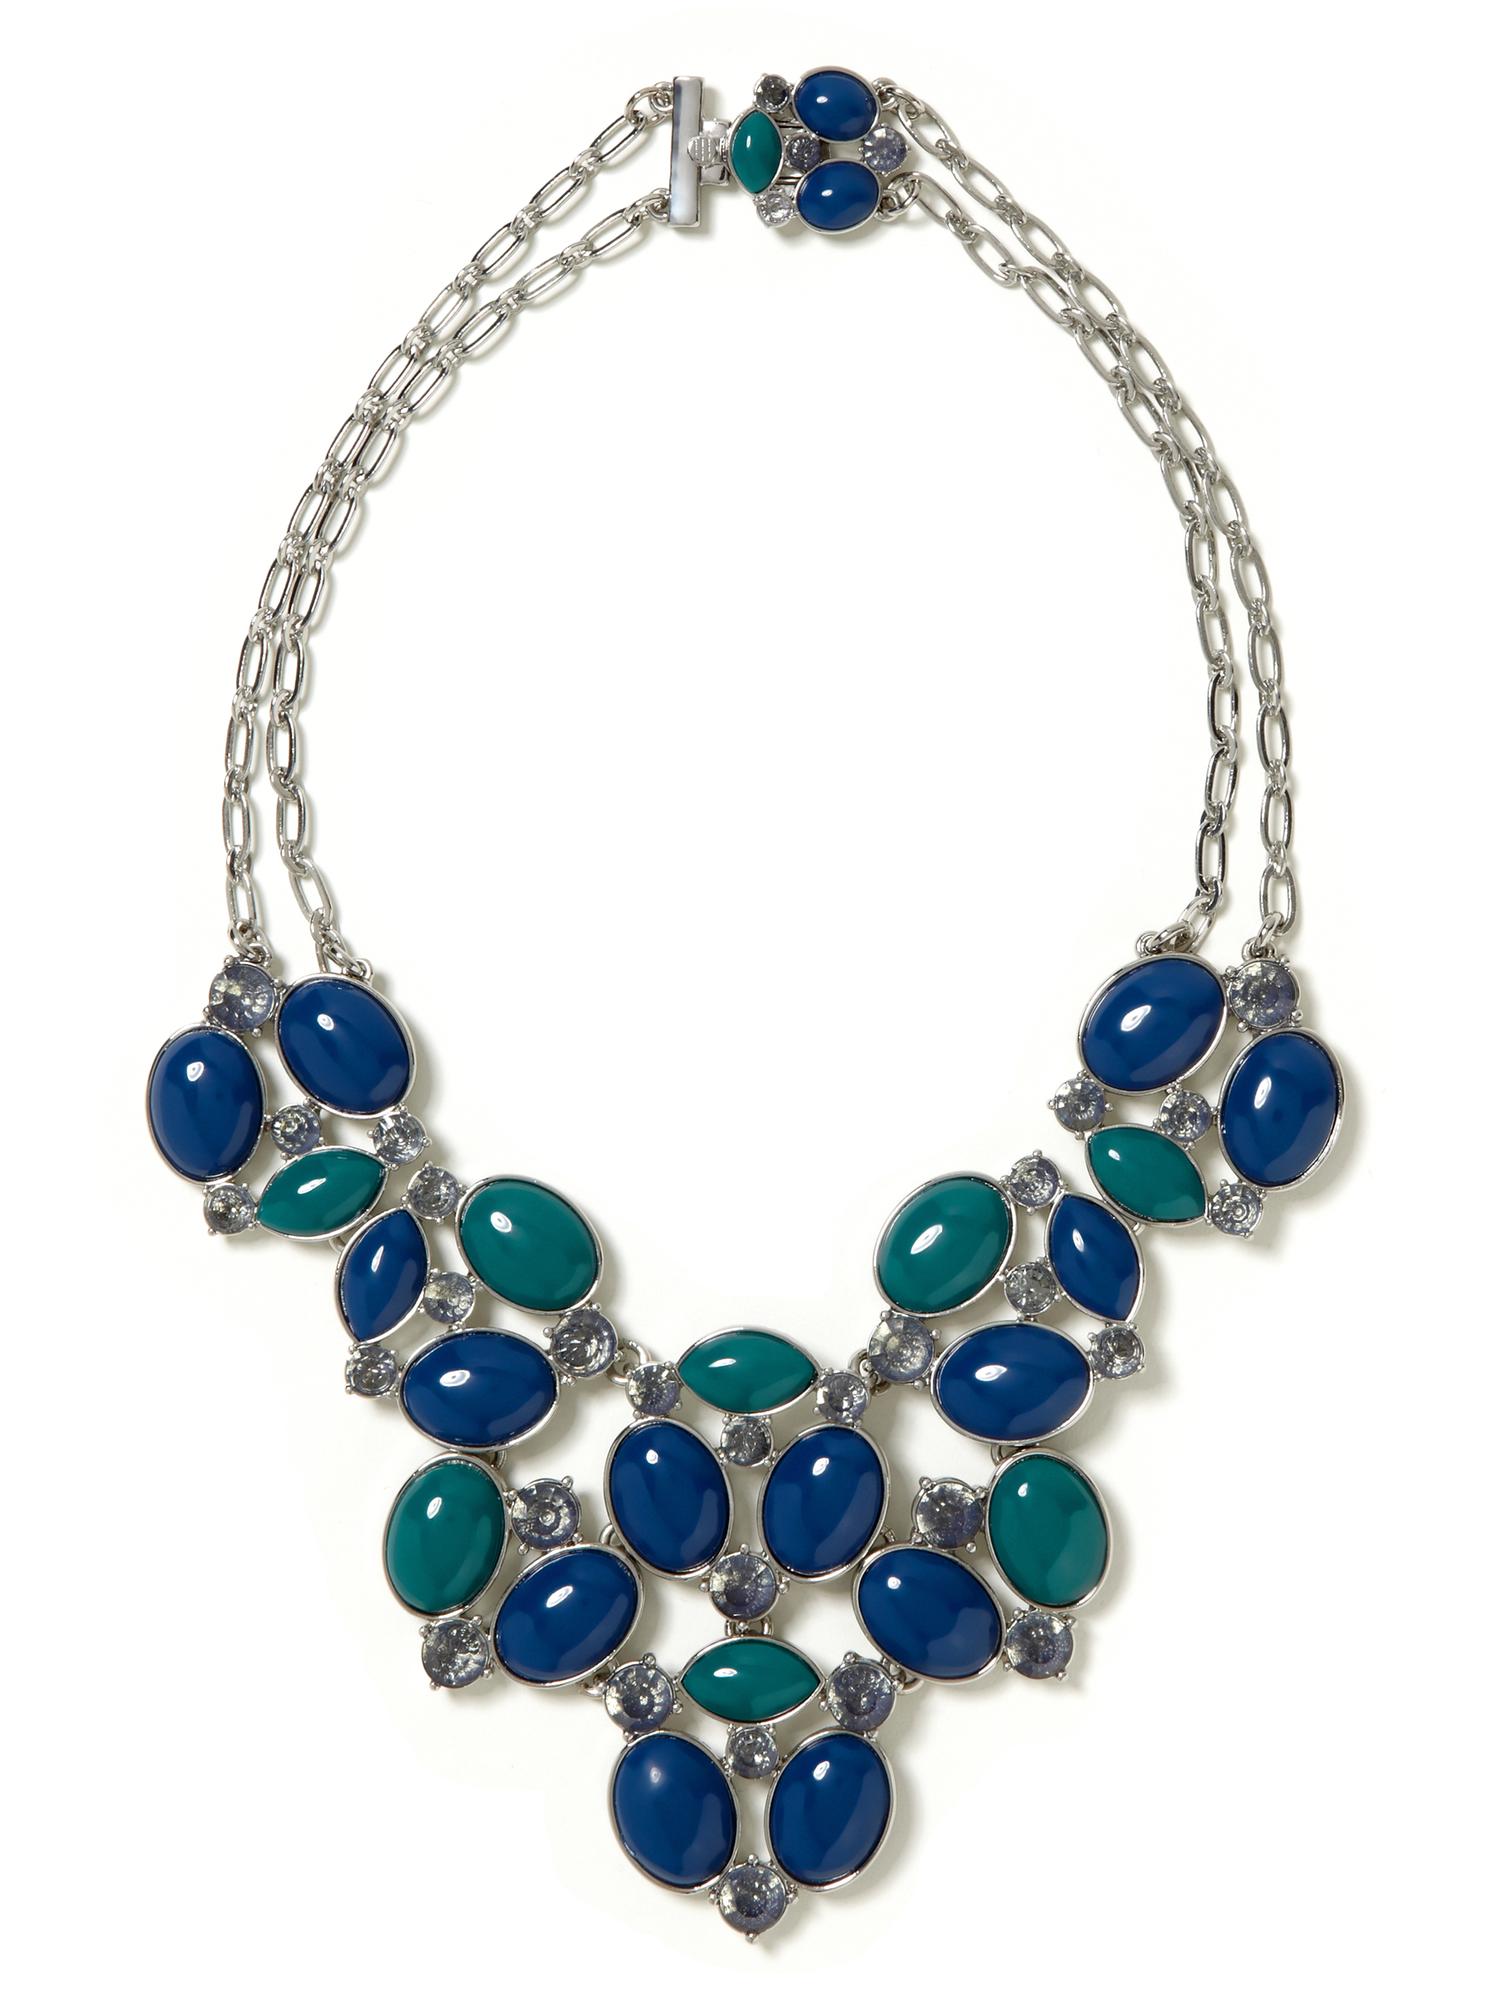 Oval focal necklace